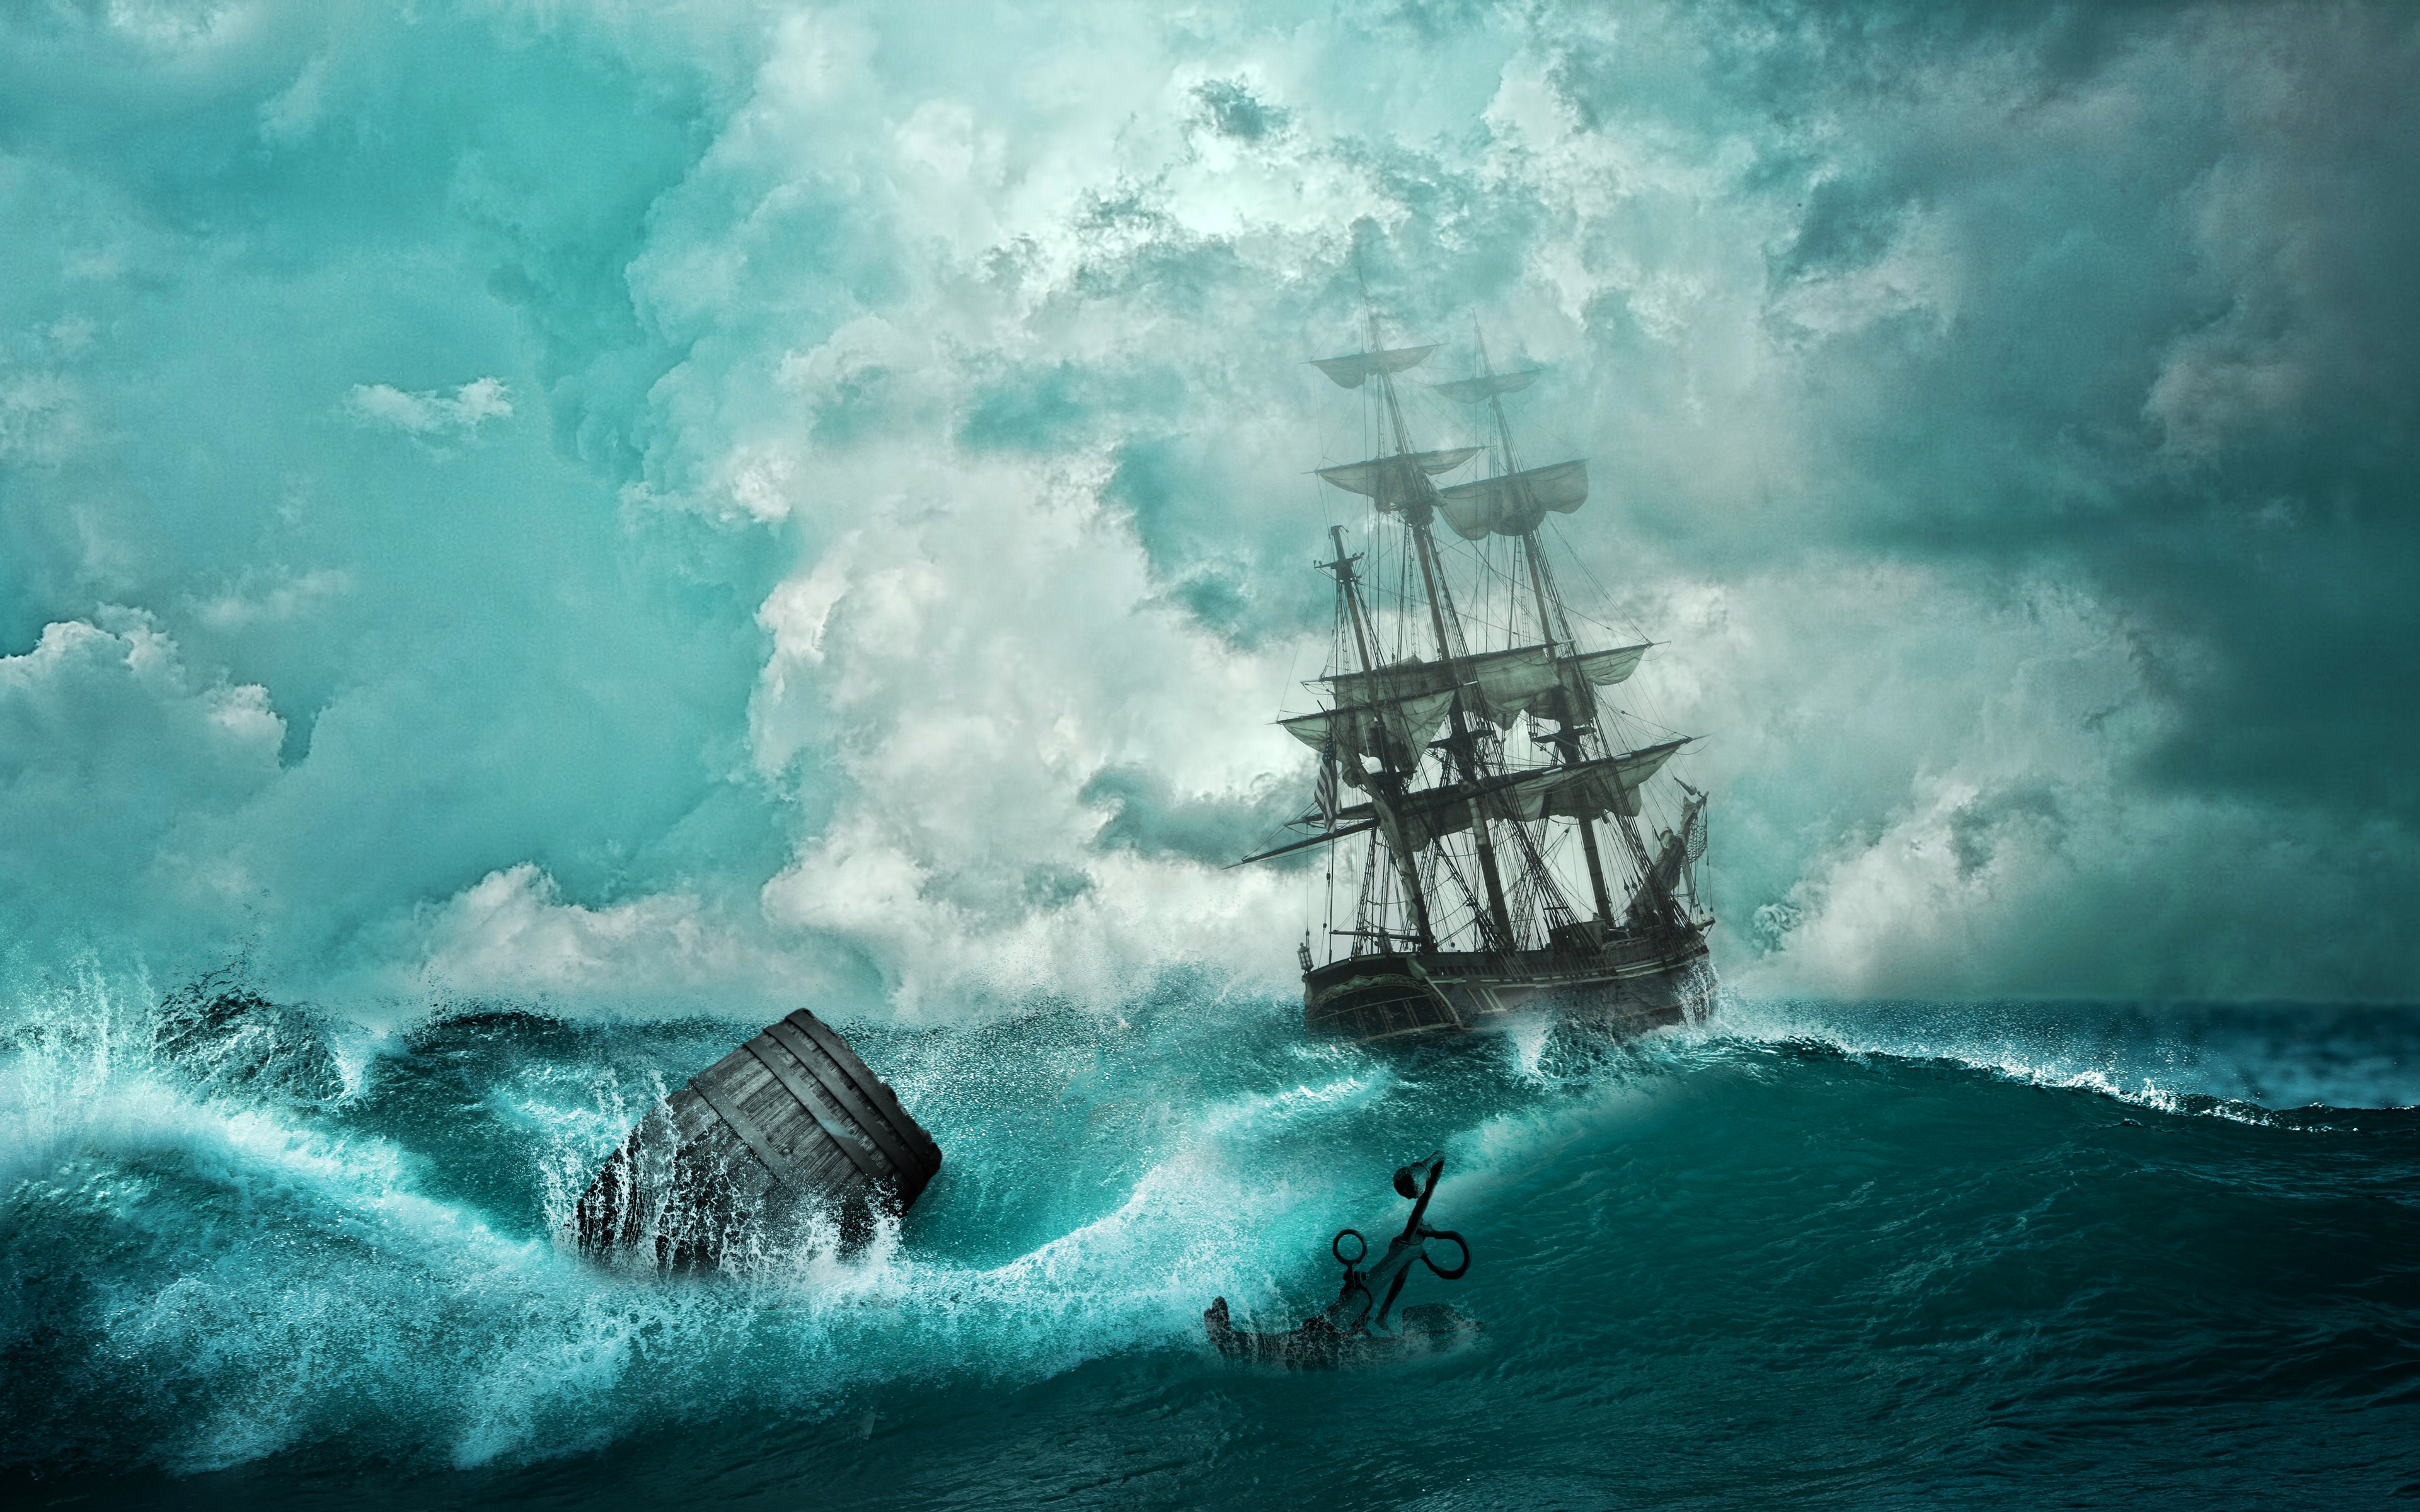 Download wallpapers pirates, 4k, sea, pirate ship, waves, storm for